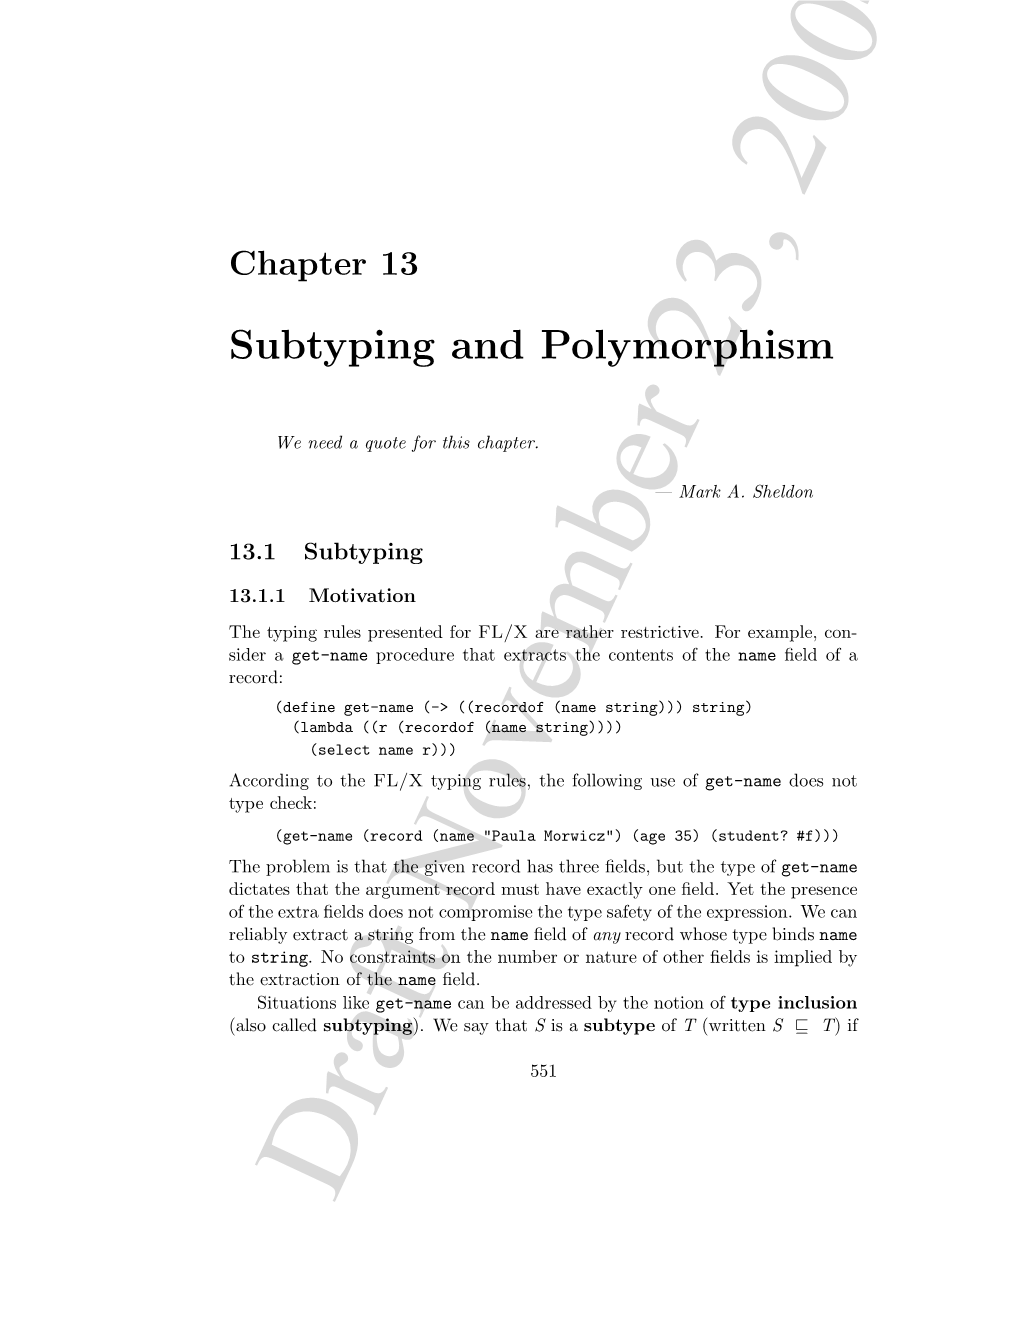 Subtyping and Polymorphism